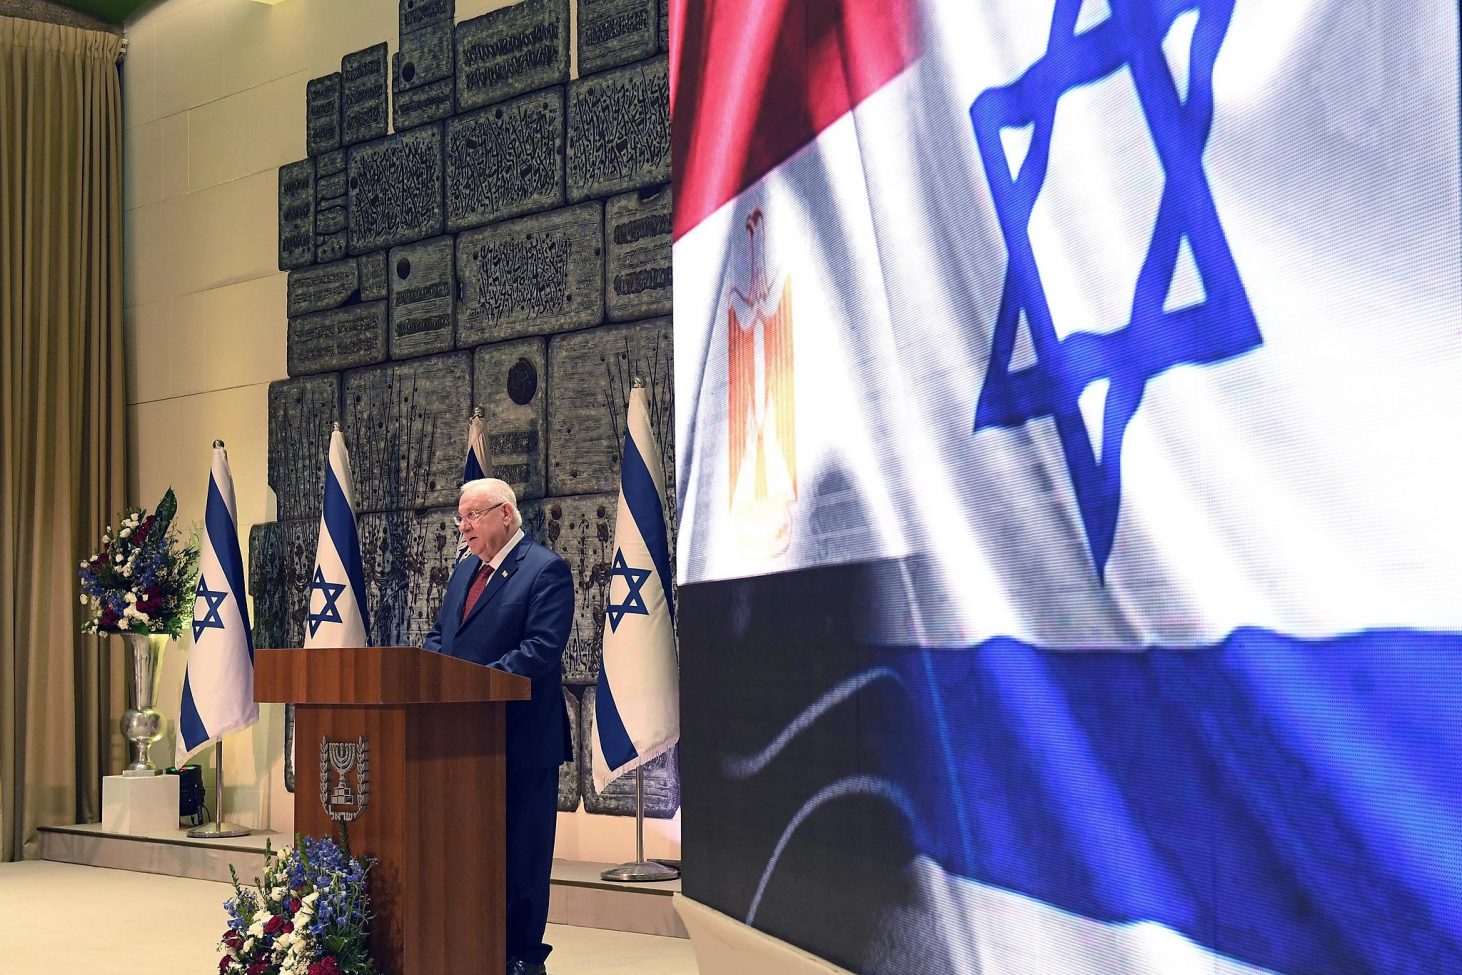 reuven_rivlin_hosting_the_egyptian_ambassador_to_israel_at_a_festive_occasion_marking_the_40th_anniversary